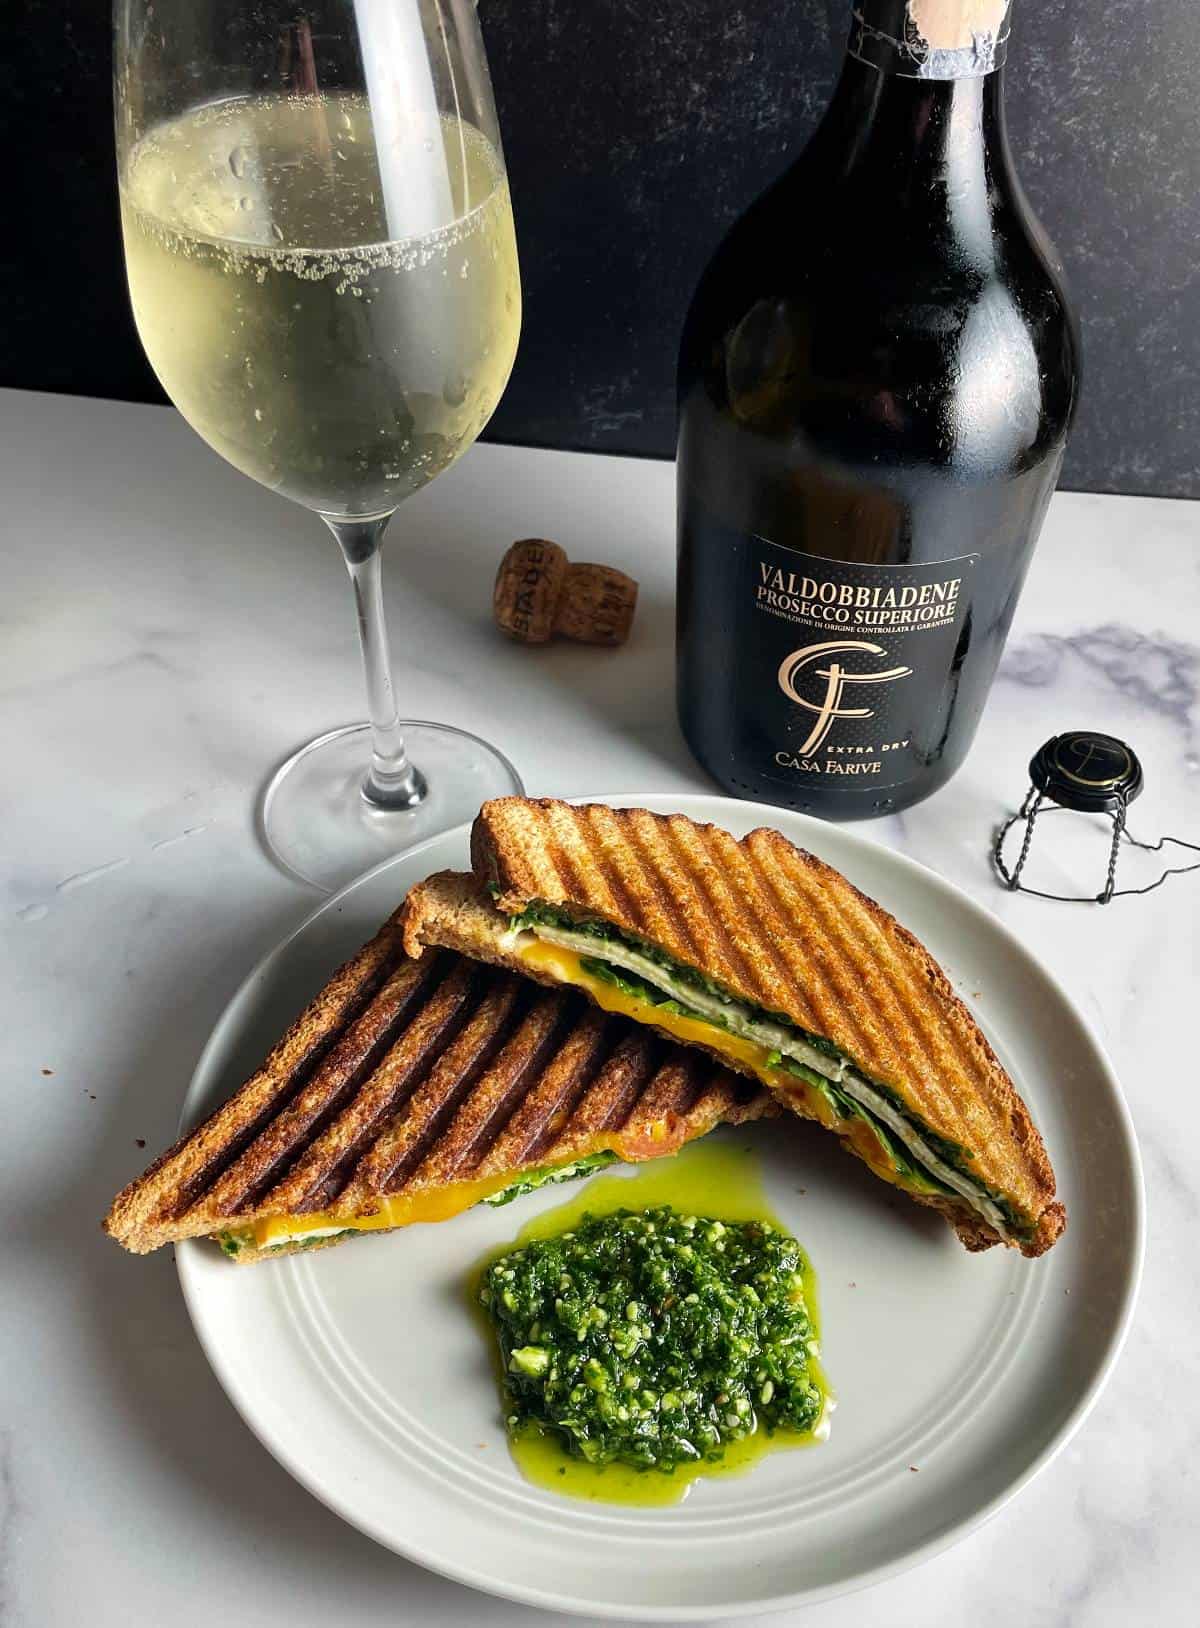 Turkey Pesto Panini, sliced in half, and served with extra pesto. Shot from above. Bottle and glass of Prosecco Superiore in the background.